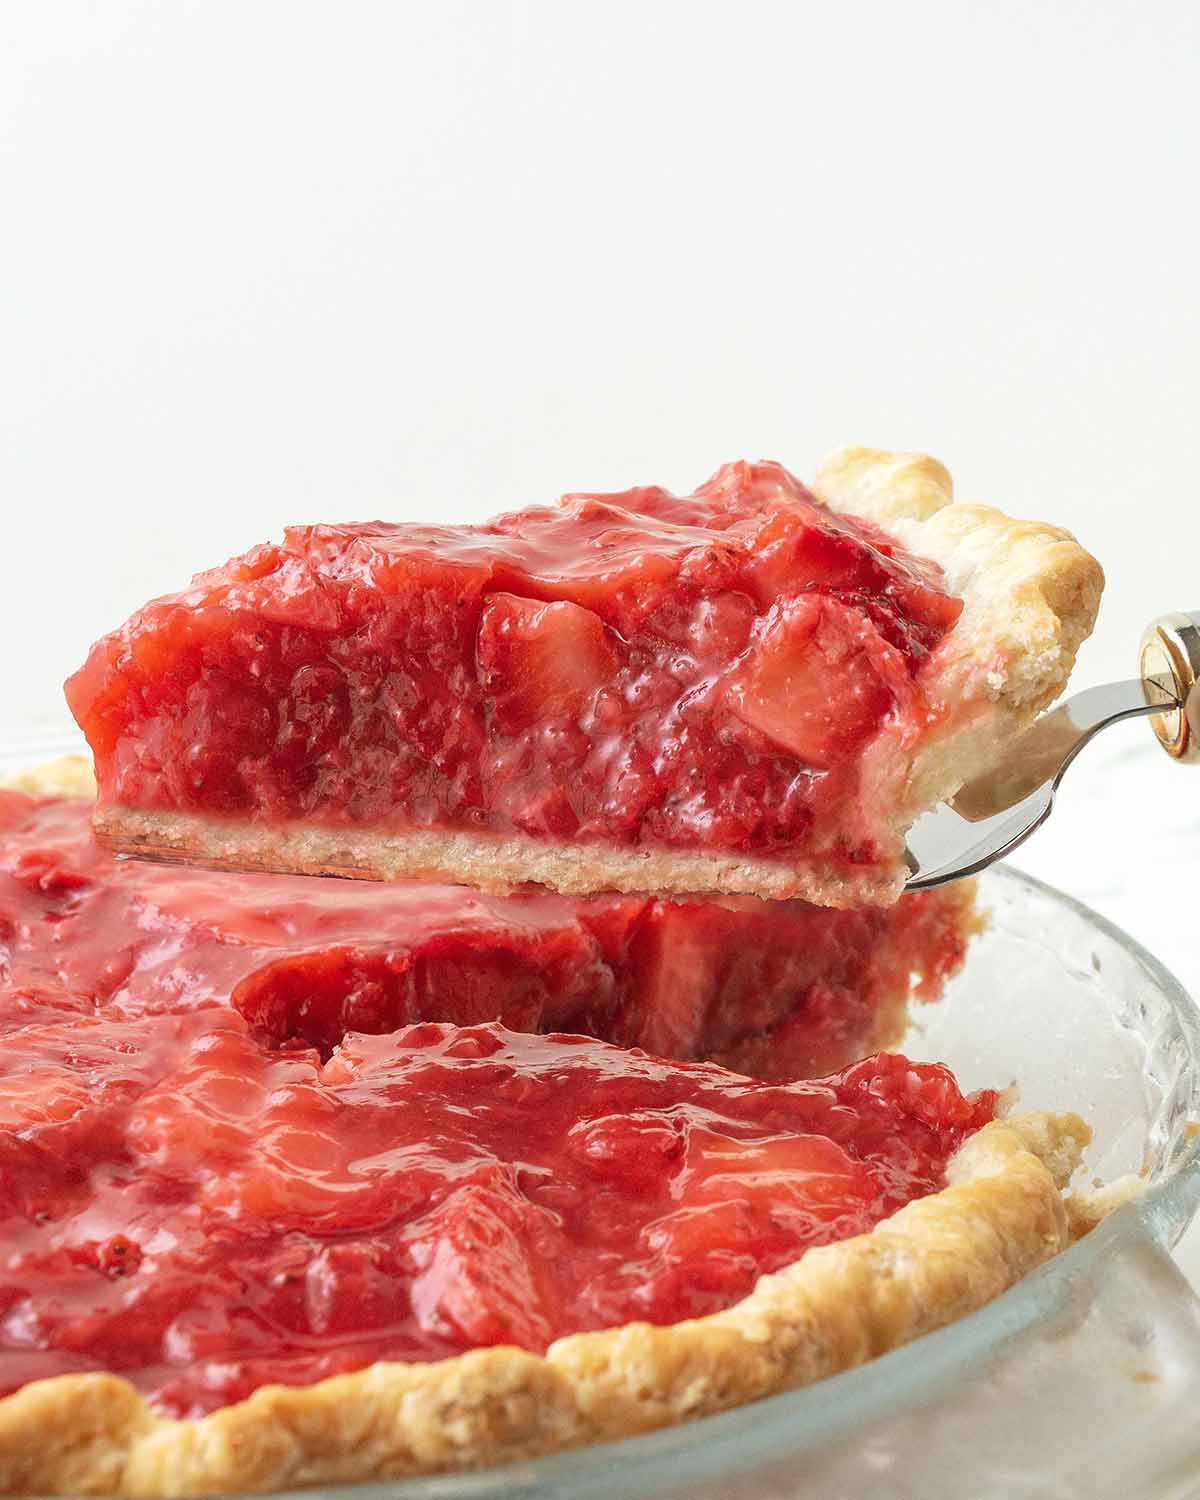 A slice of strawberry pie being lifted out of a pie plate and away from the rest of the pie with a pie server.